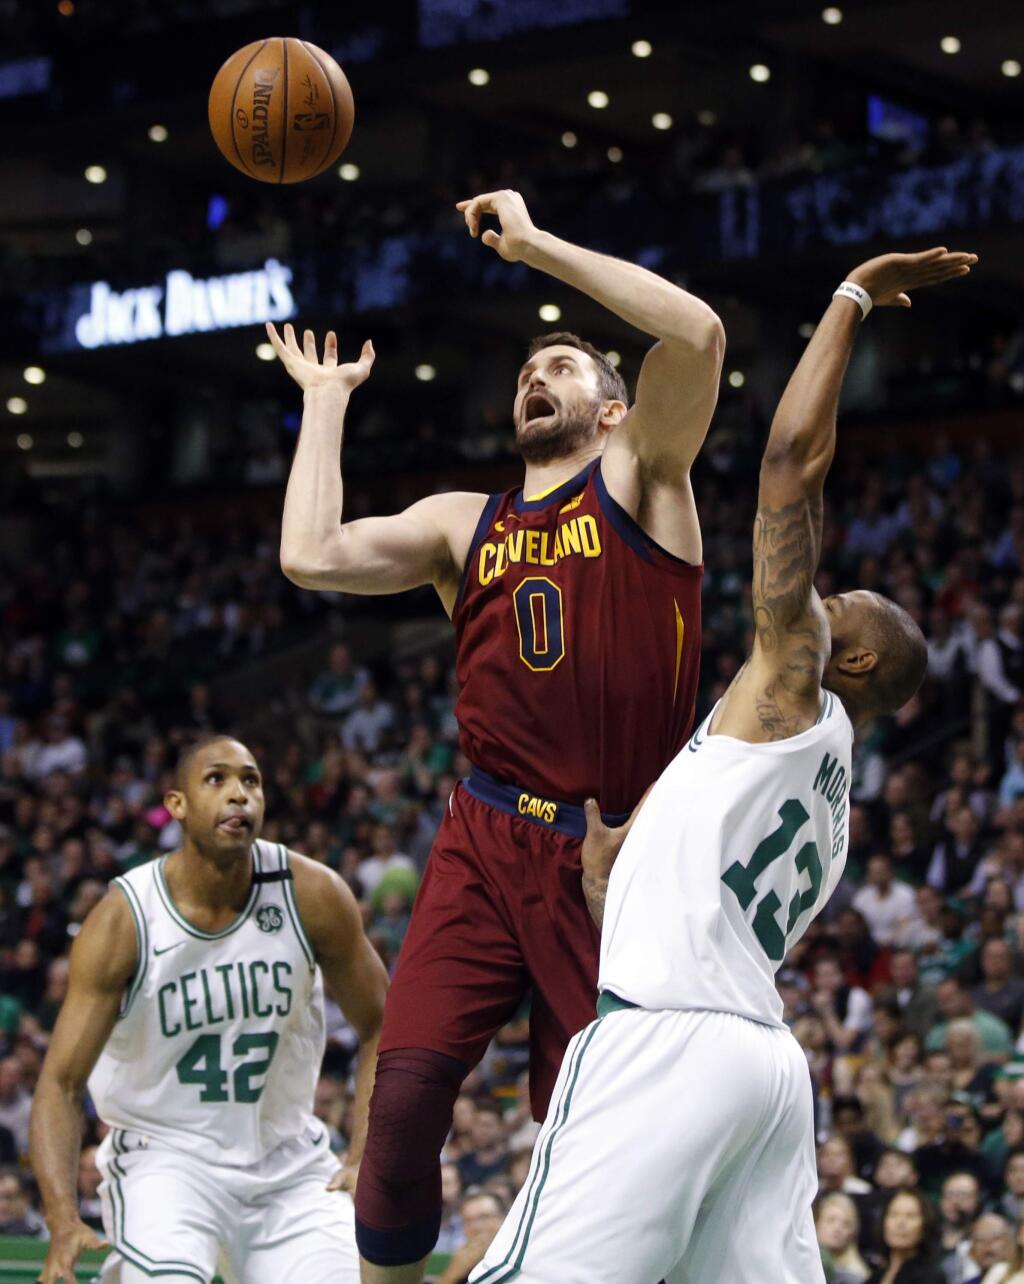 Cleveland Cavaliers center Kevin Love (0) loses control of the ball against the defense of Boston Celtics forwards Al Horford (42) and Marcus Morris (13) during the first quarter of Game 1 of the NBA basketball Eastern Conference Finals, Sunday, May 13, 2018, in Boston. (AP Photo/Michael Dwyer)